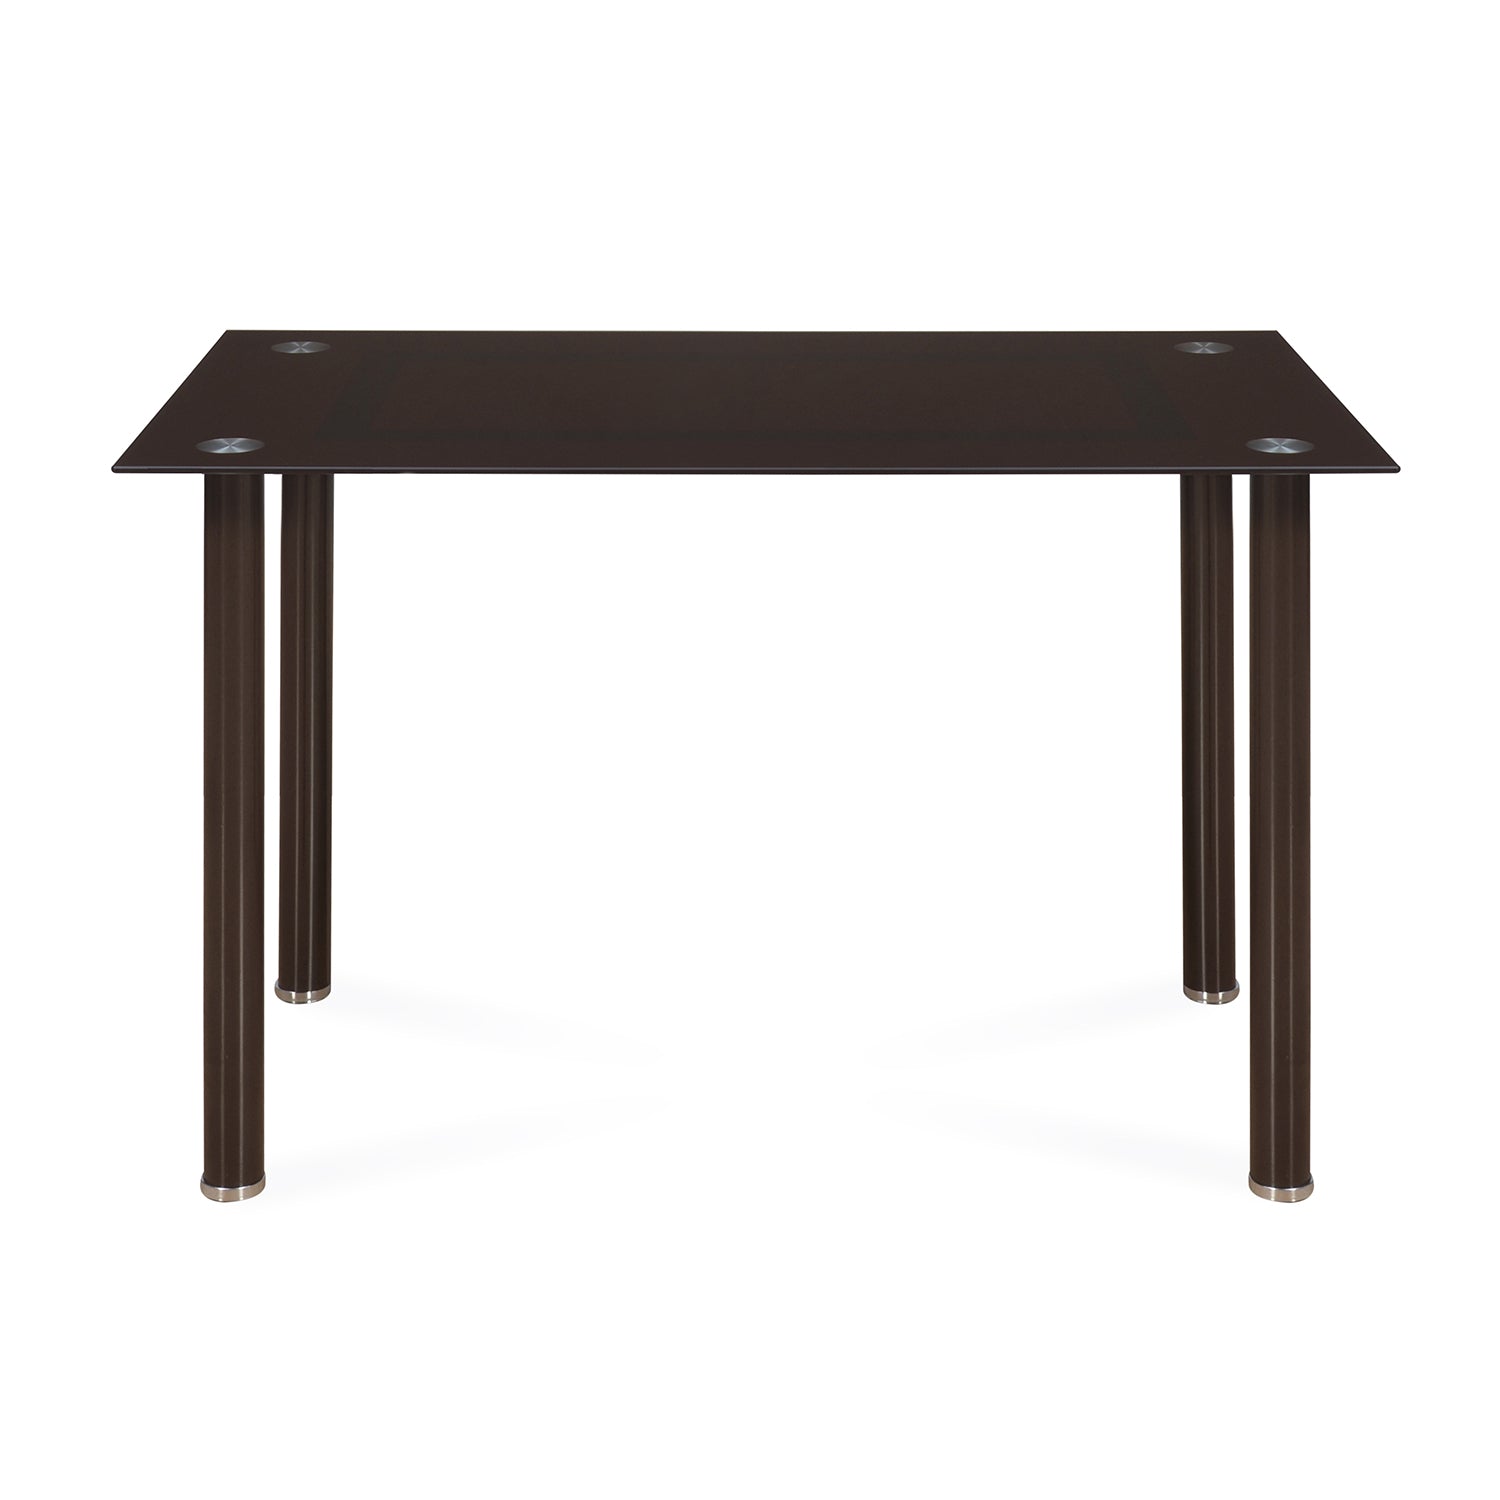 Joseph 4 Seater Dining Table (Brown)